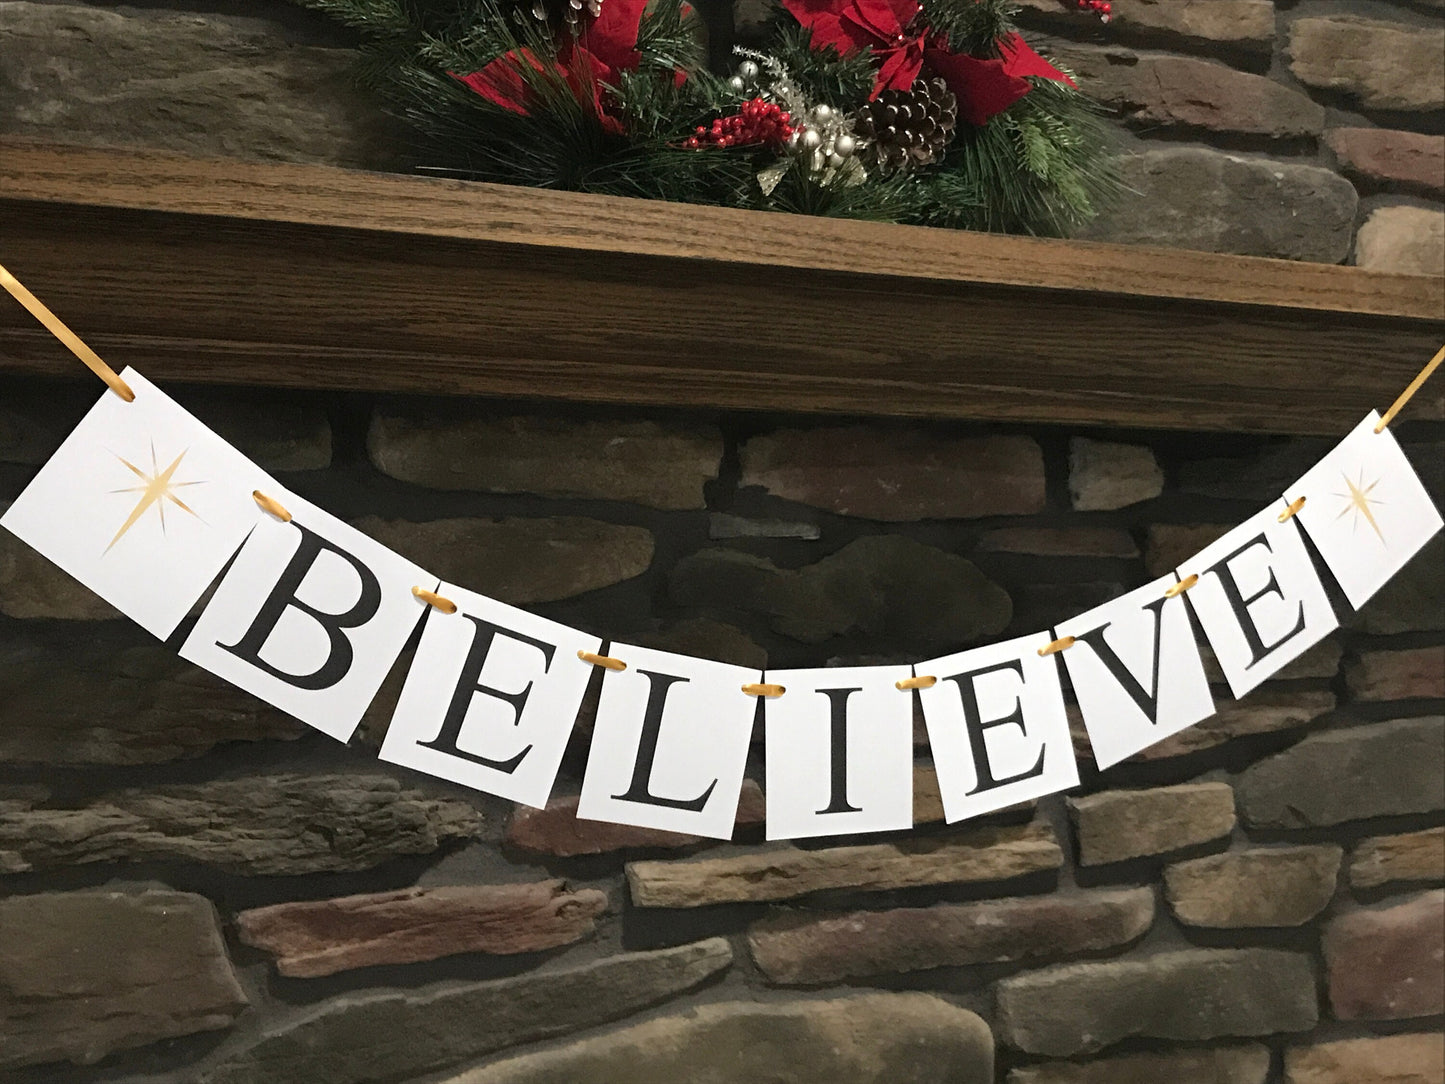 Believe sign, Christmas decorations, fireplace mantel holiday decor, Christmas garland, believe banner gold north star Christmas decor